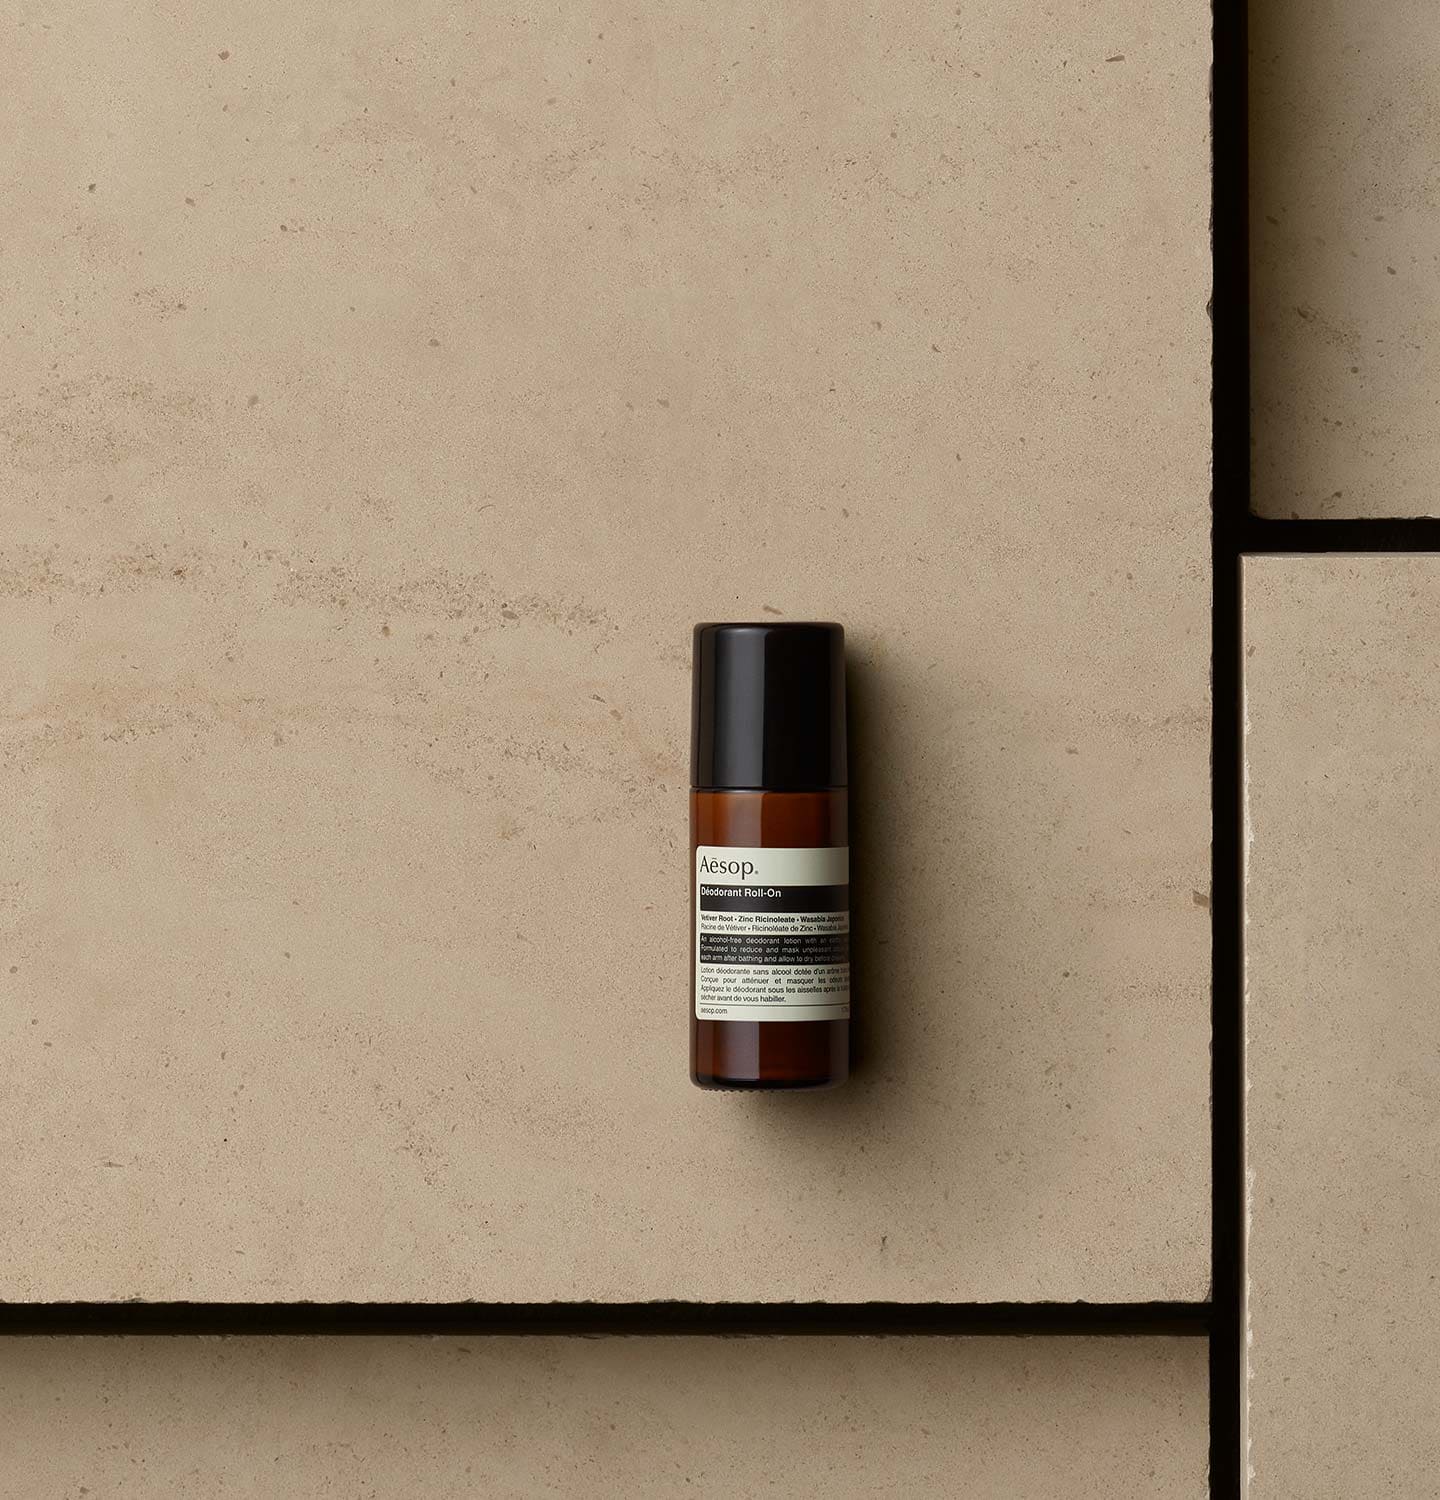 Aesop Deodorant Roll-On in amber bottle arranged on a beige textured surface.